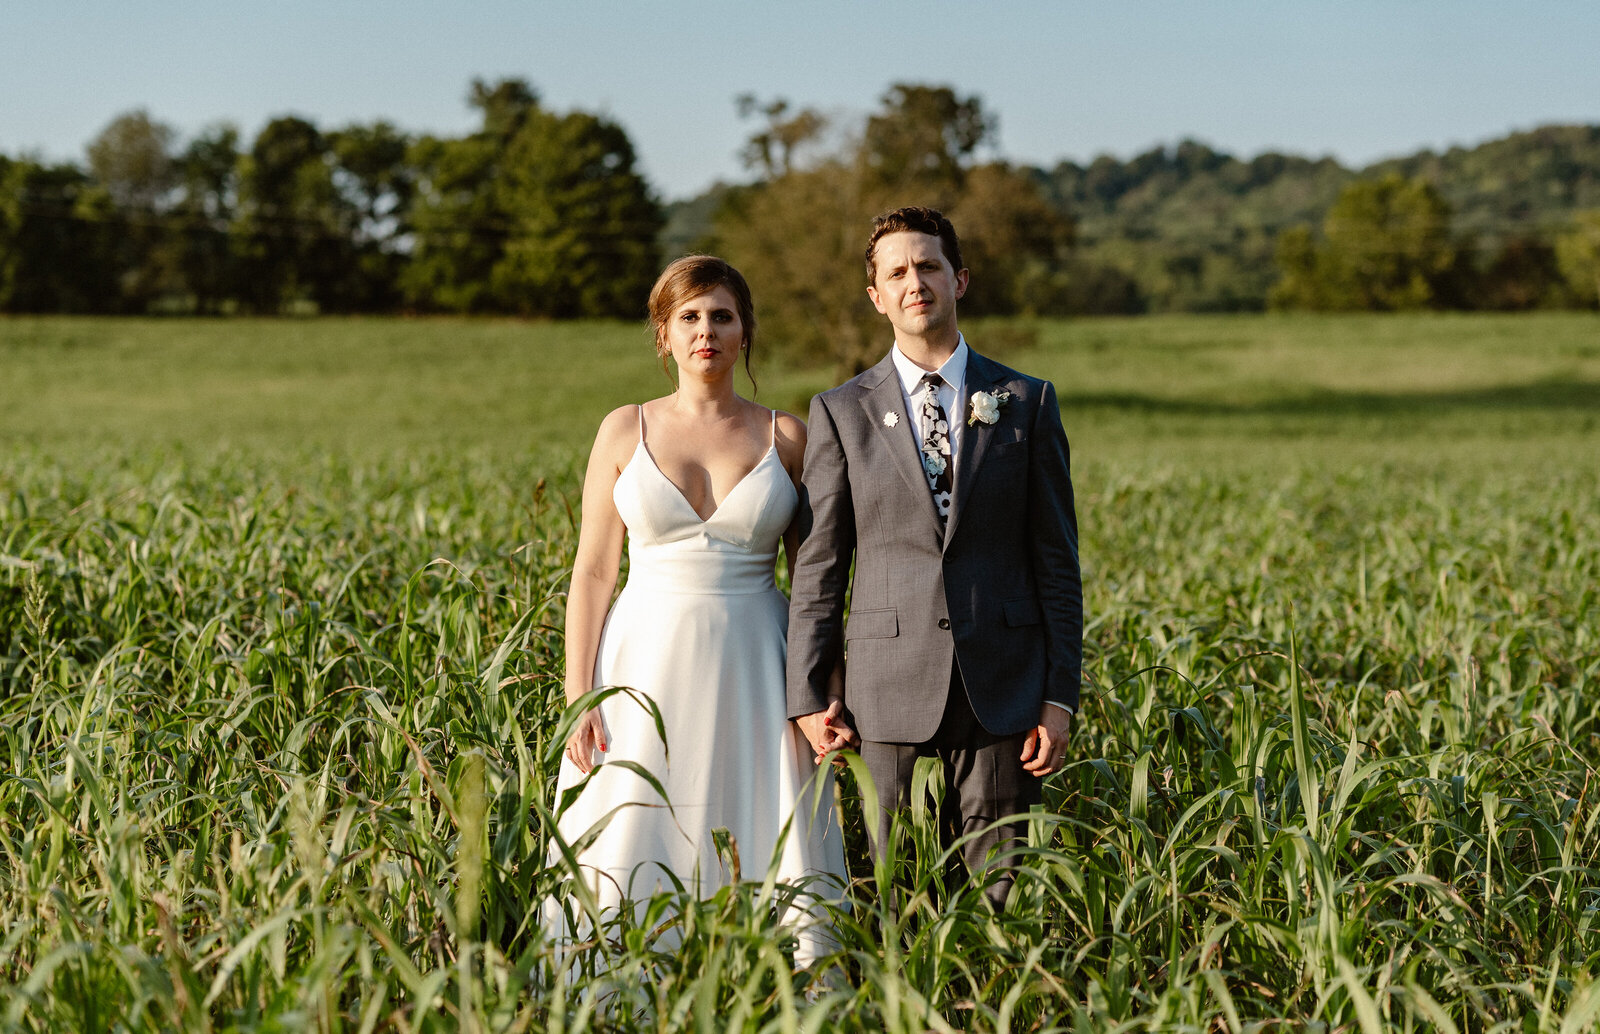 Neal + Brittney Wedding 2019 - Kelsey Justice Photograpy-1